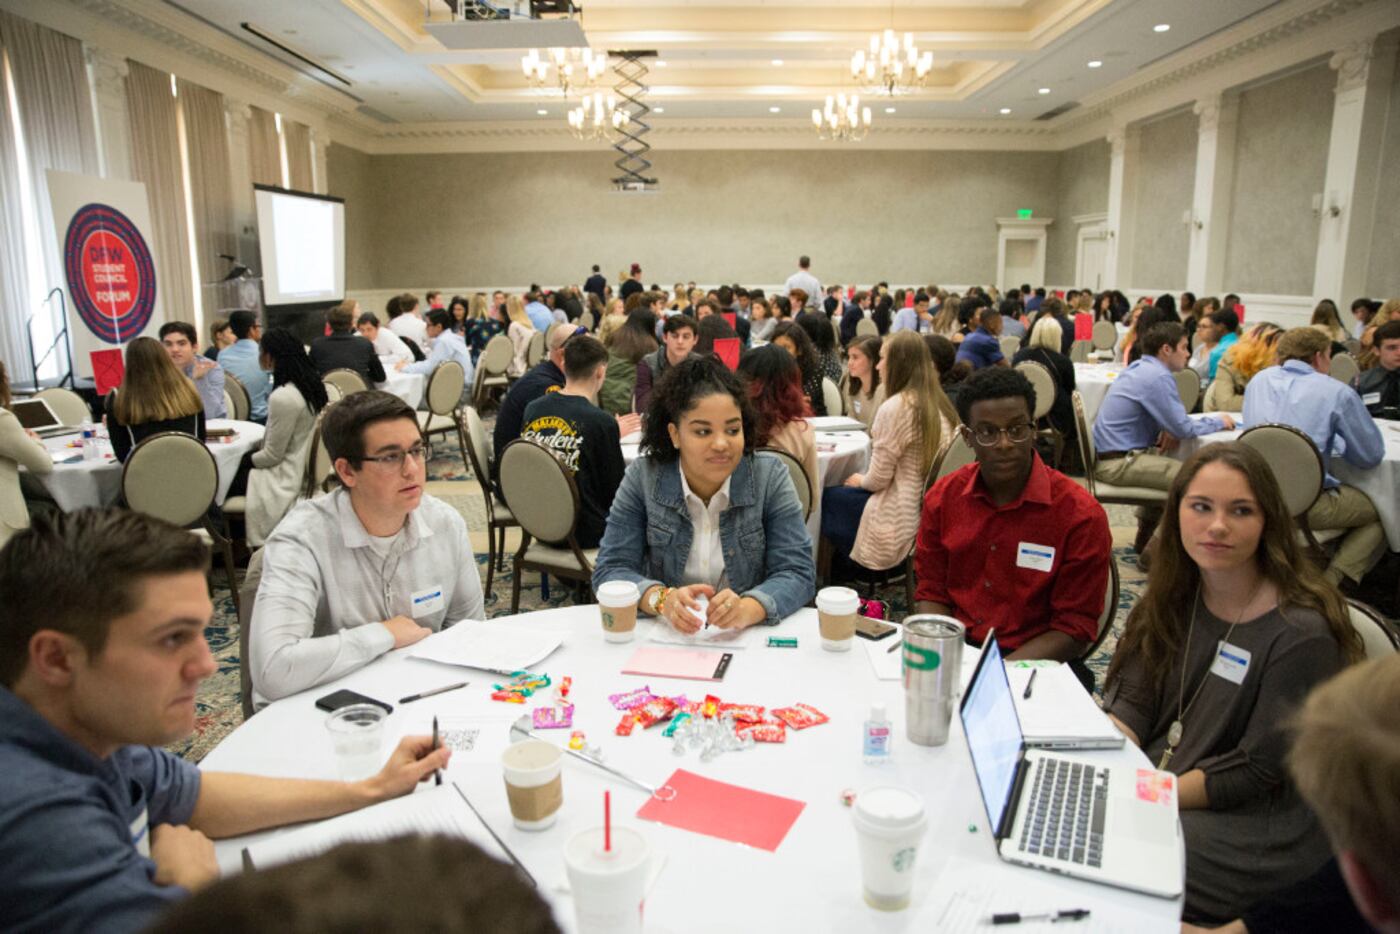 More than twenty area schools attend the DFW Student Council Leadership Forum, hosted by...